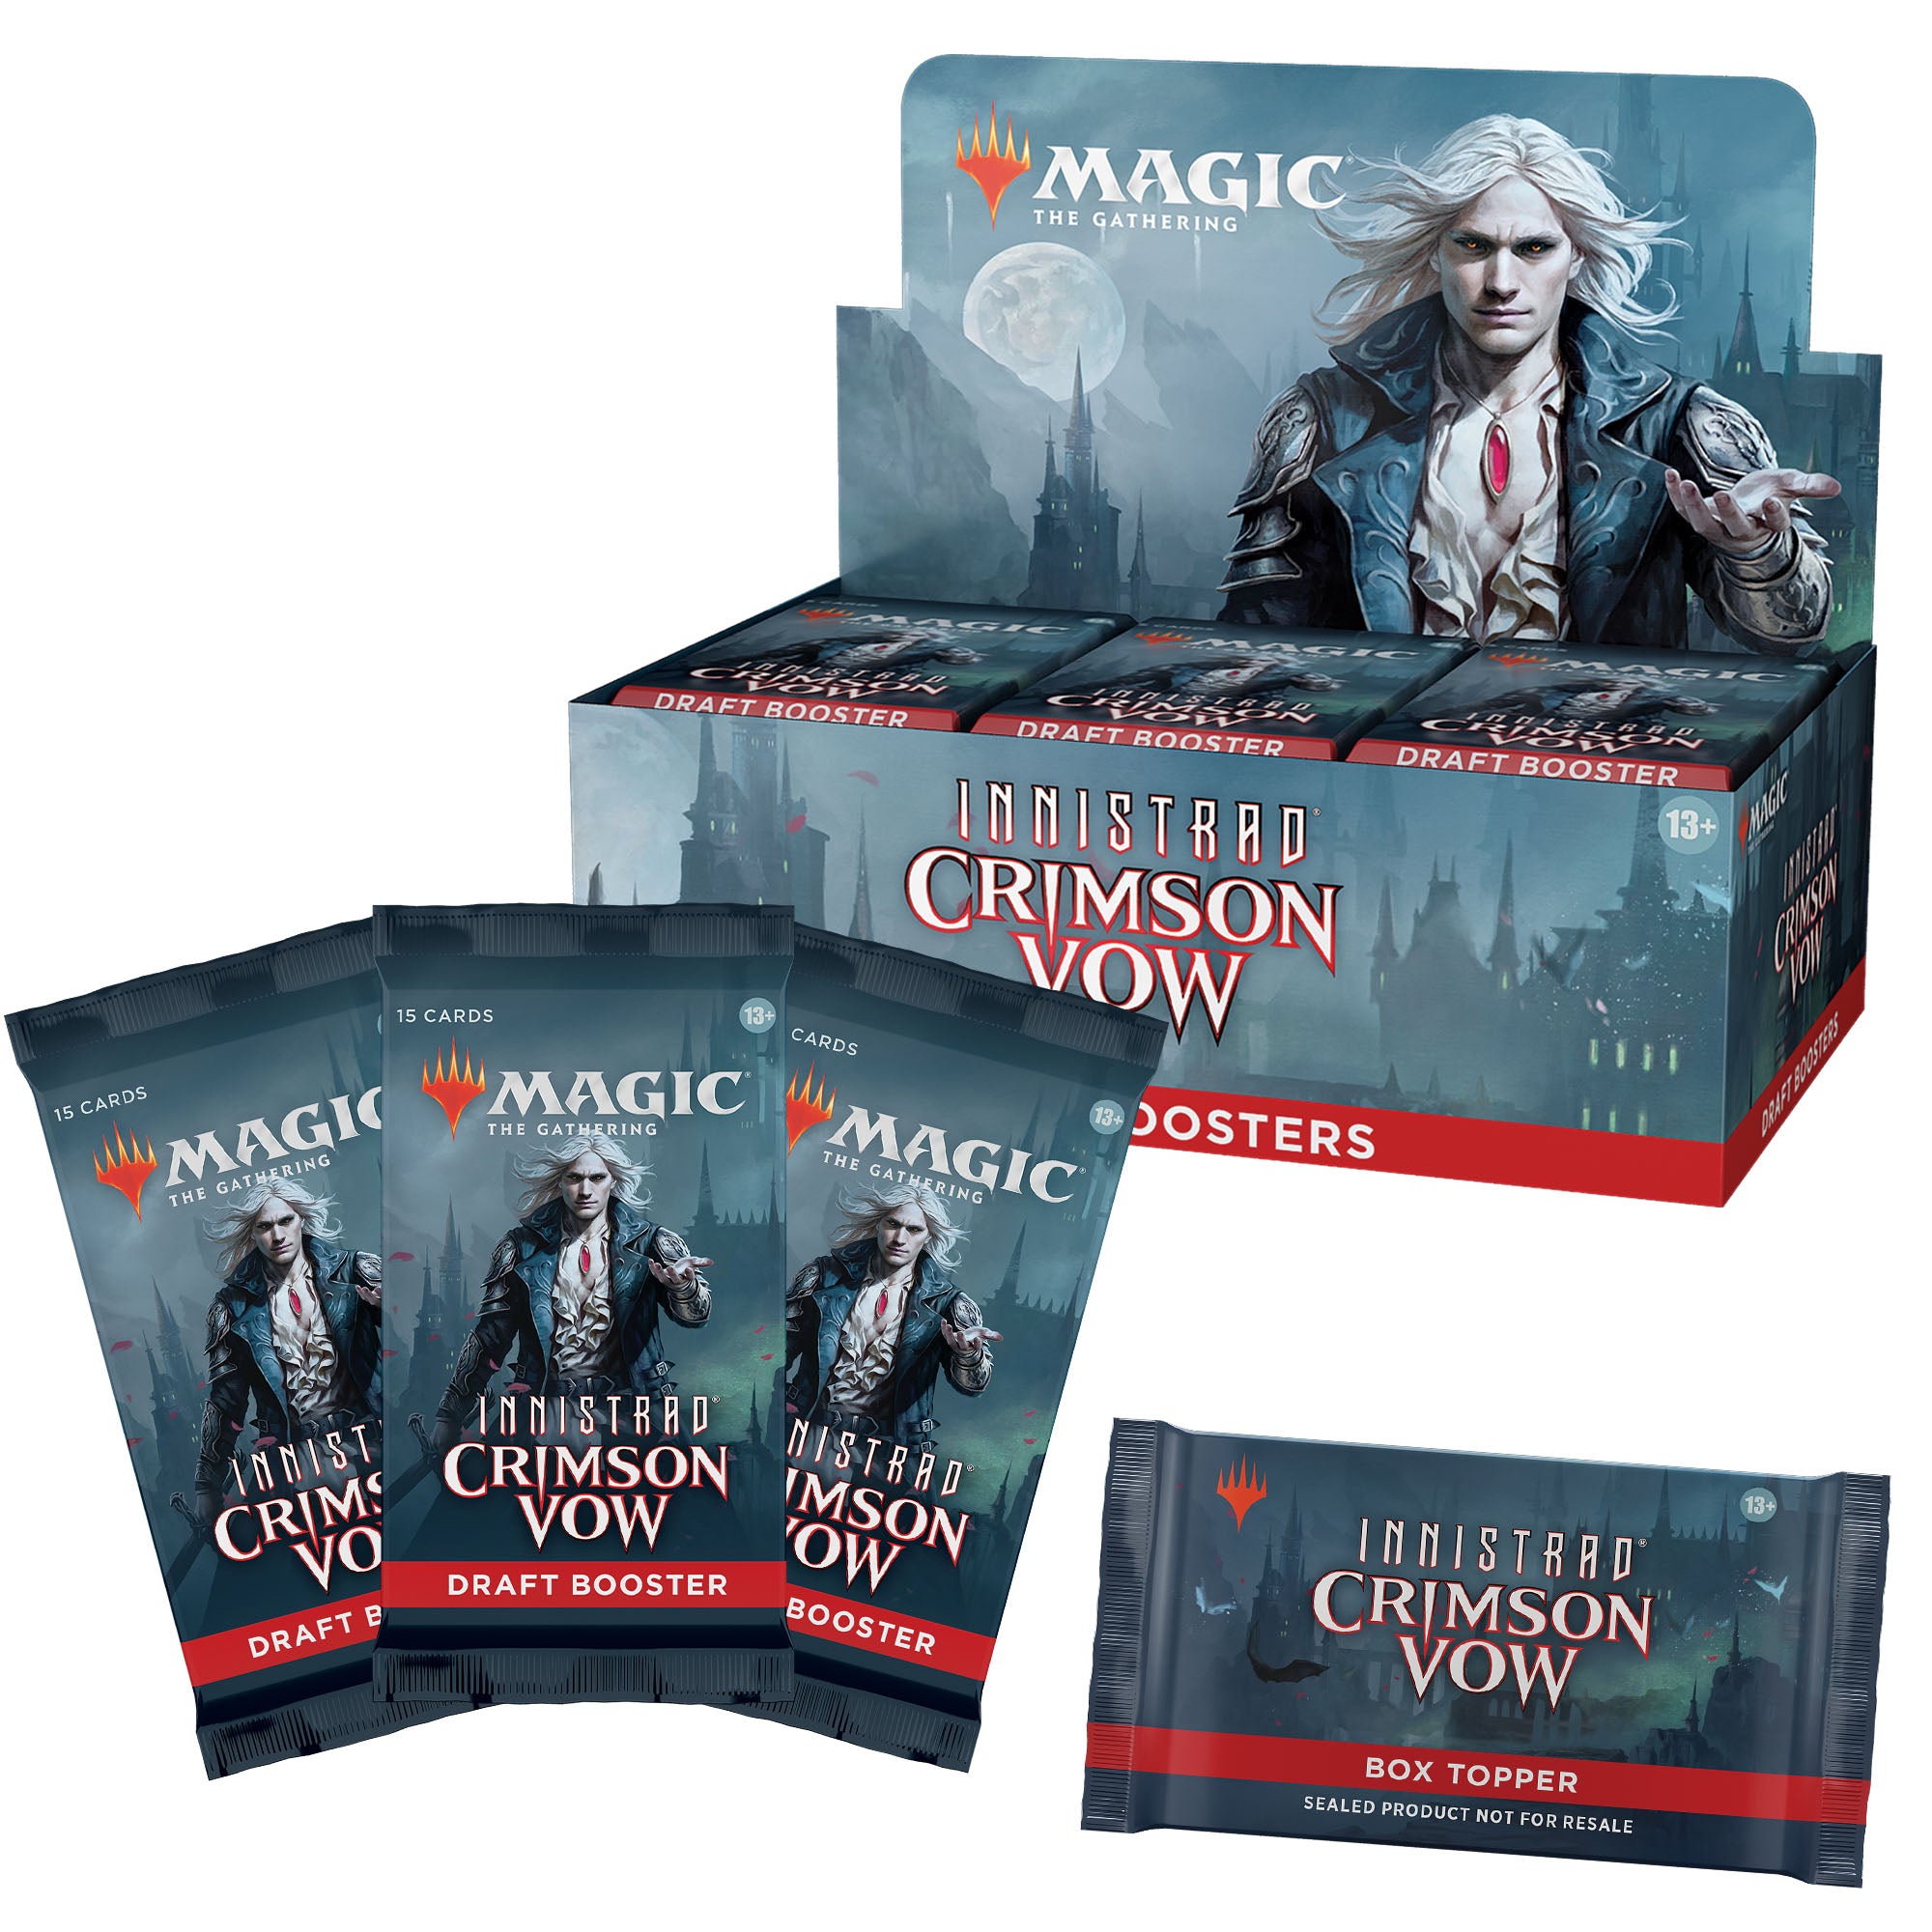 Magic the Gathering - Innistrad: Crimson Vow - Draft Booster Box